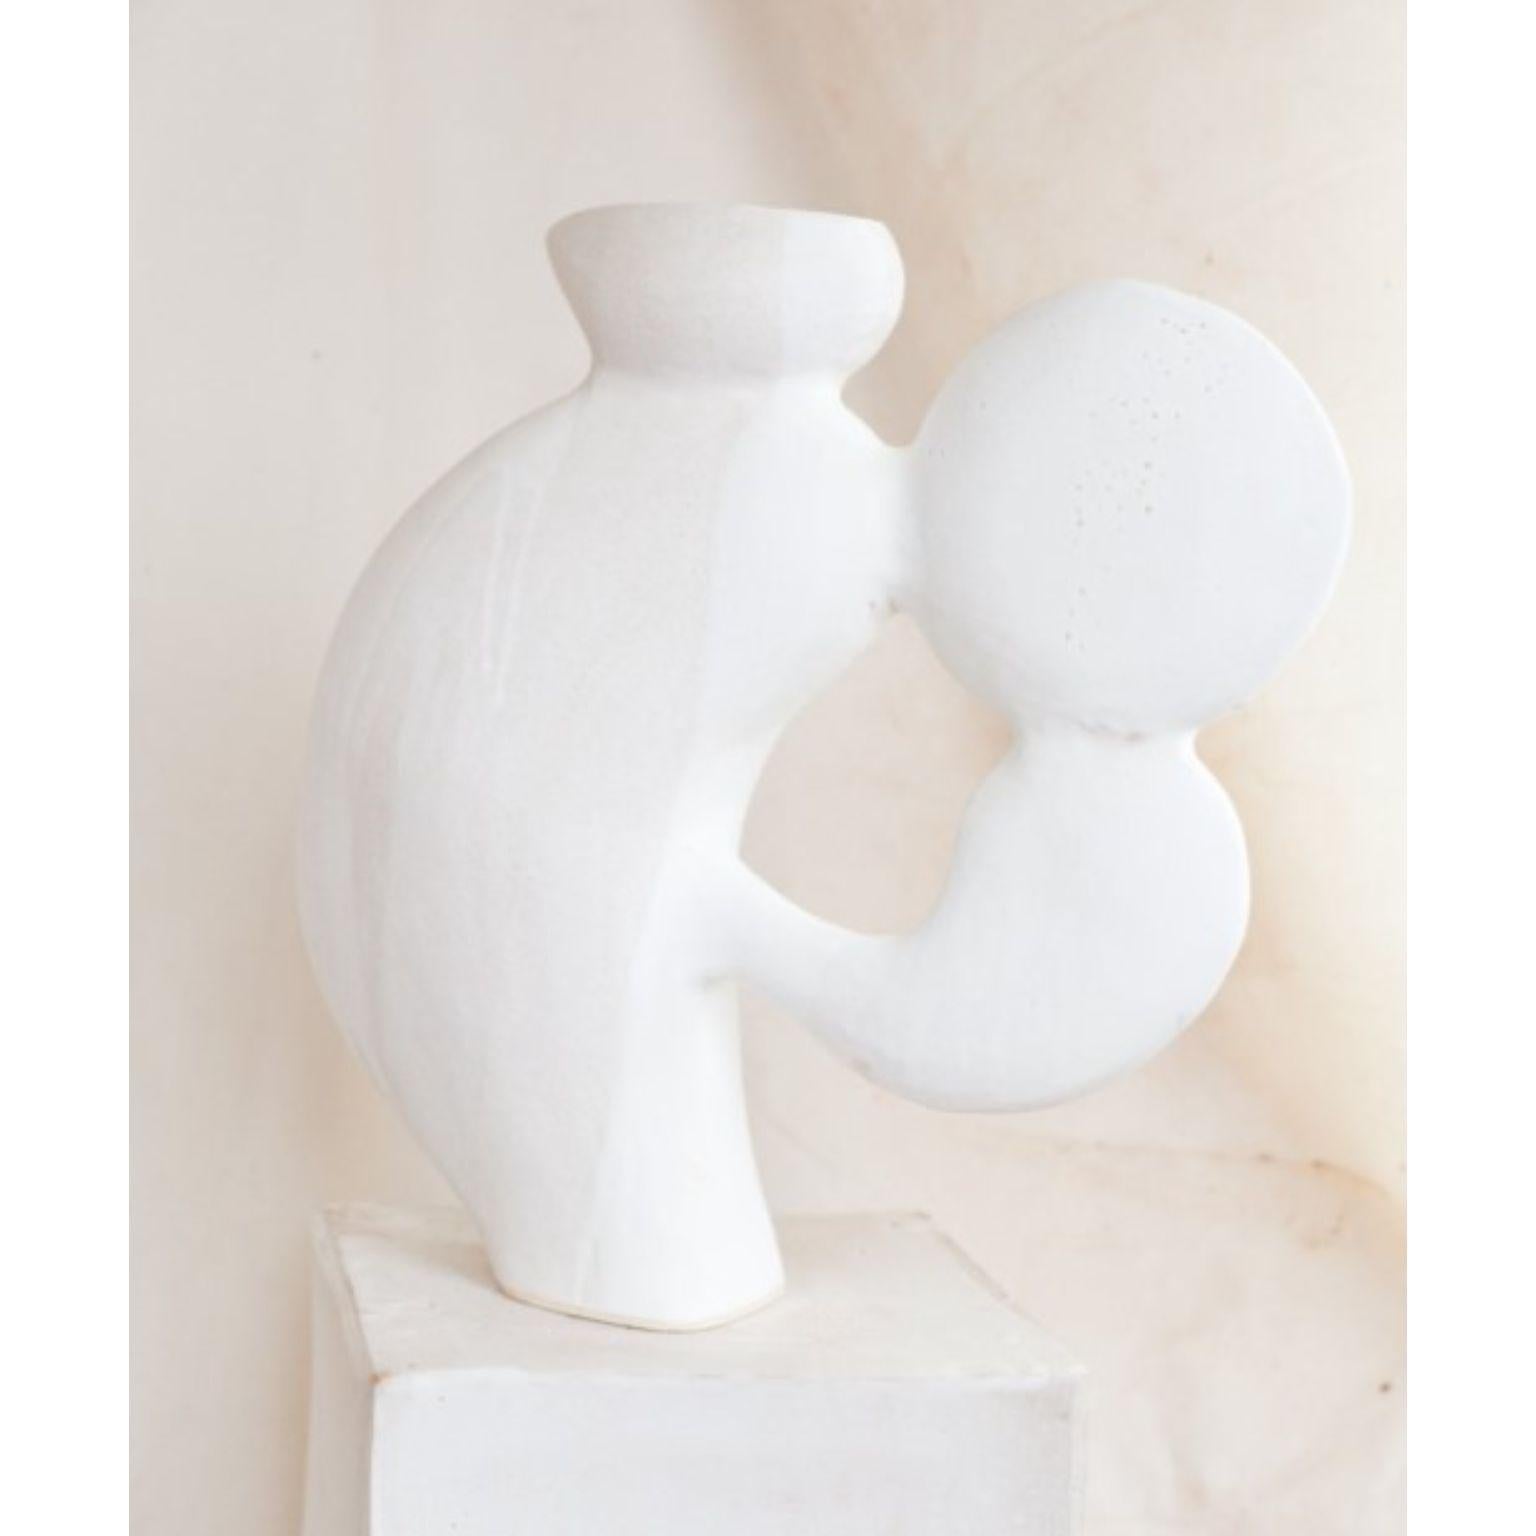 Dogu lady 20 vase by Noe Kuremoto
Materials: white stoneware sculpture
Dimensions: D 15 x W 41 x H 44 cm 

Dogu ladies
My interpretation of the ancient Dogu*.
A talisman for women.
For the woman who wants a child but fears the risk to her